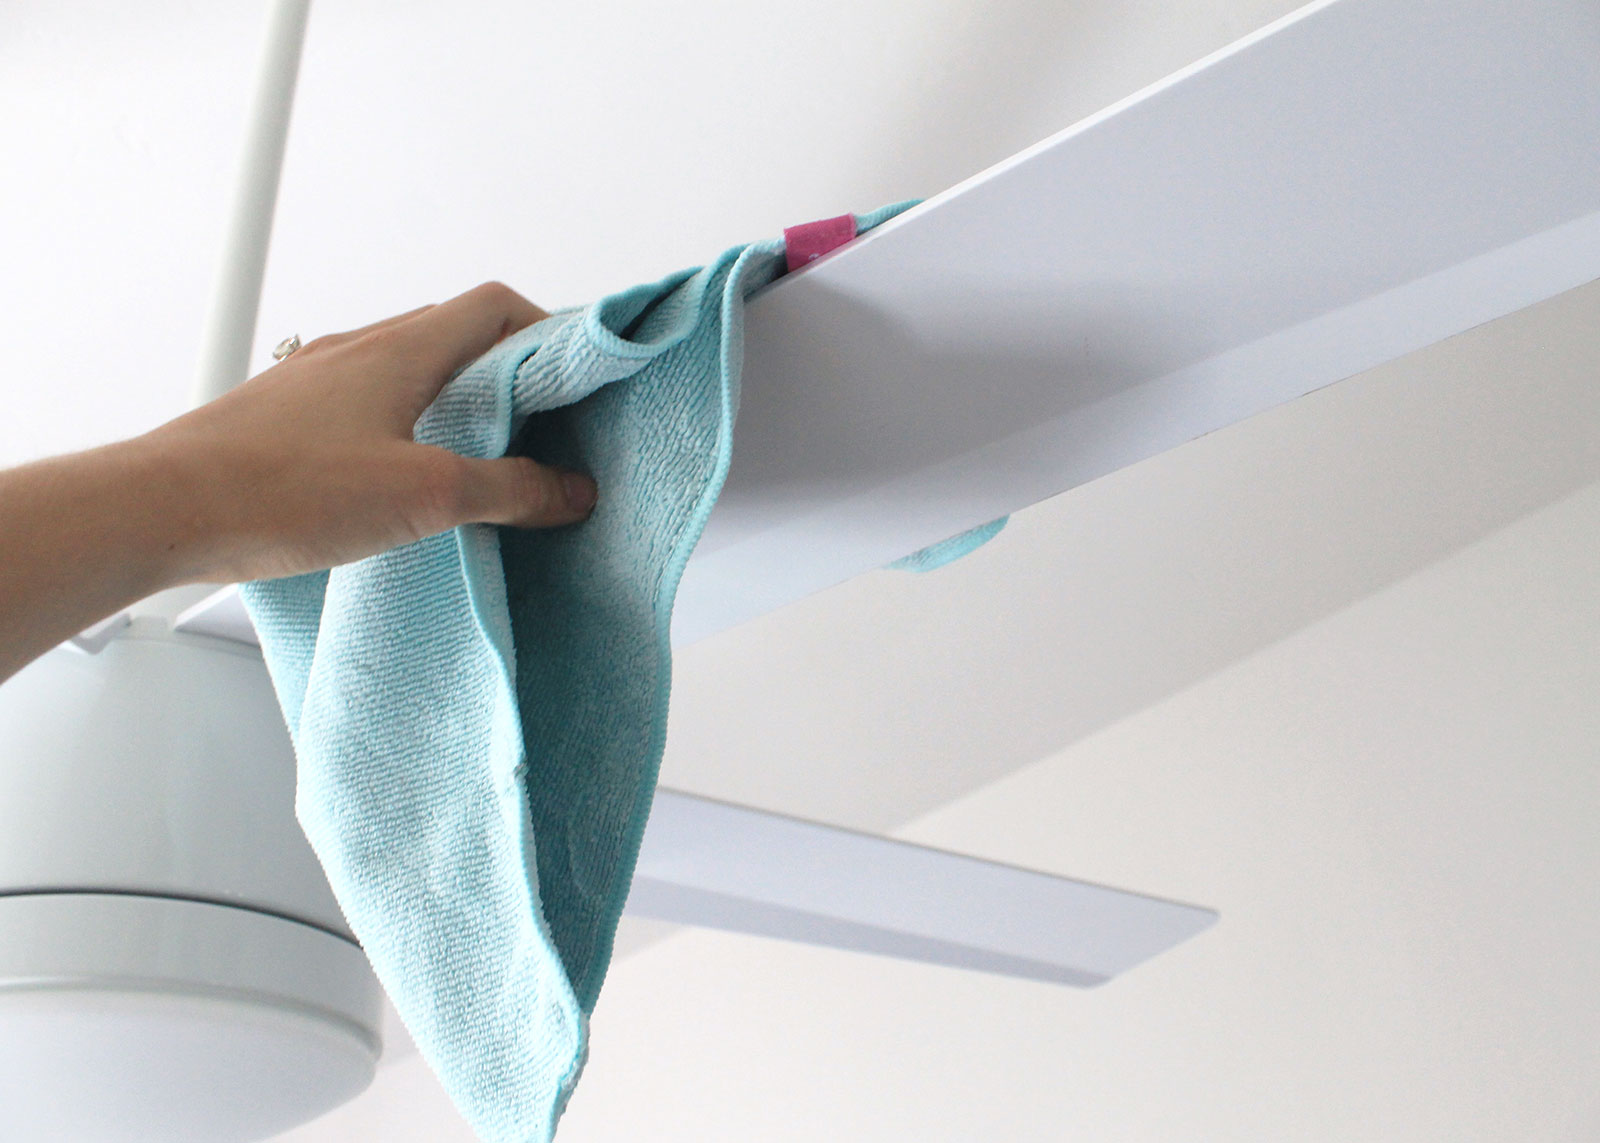 How to Clean Ceiling Fans